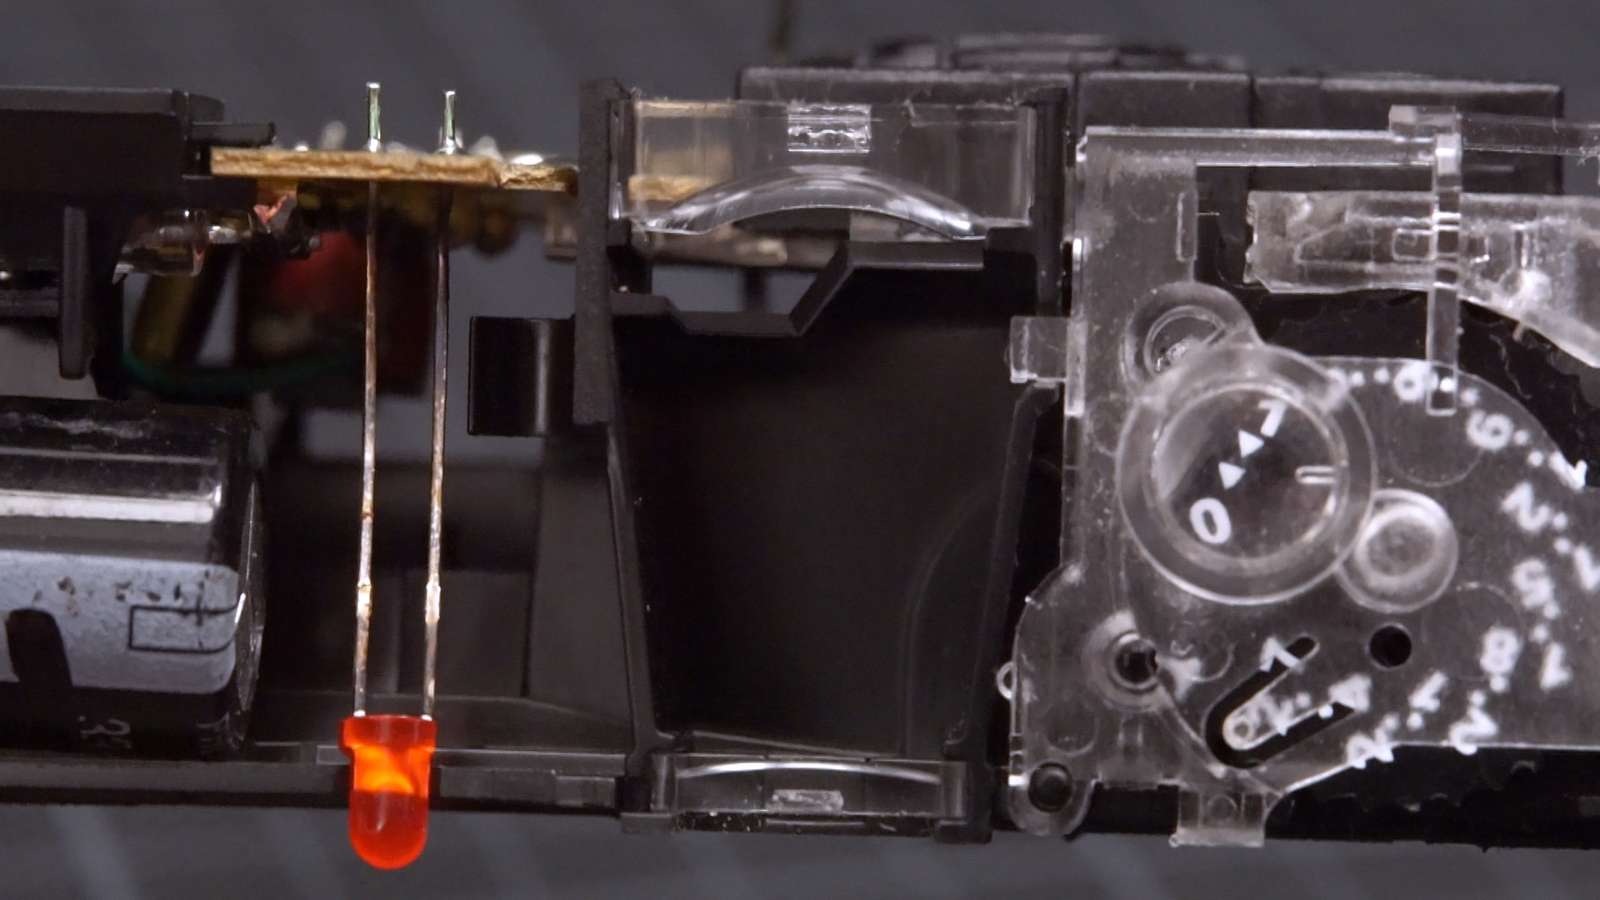 Viewfinder in a disassembled disposable camera